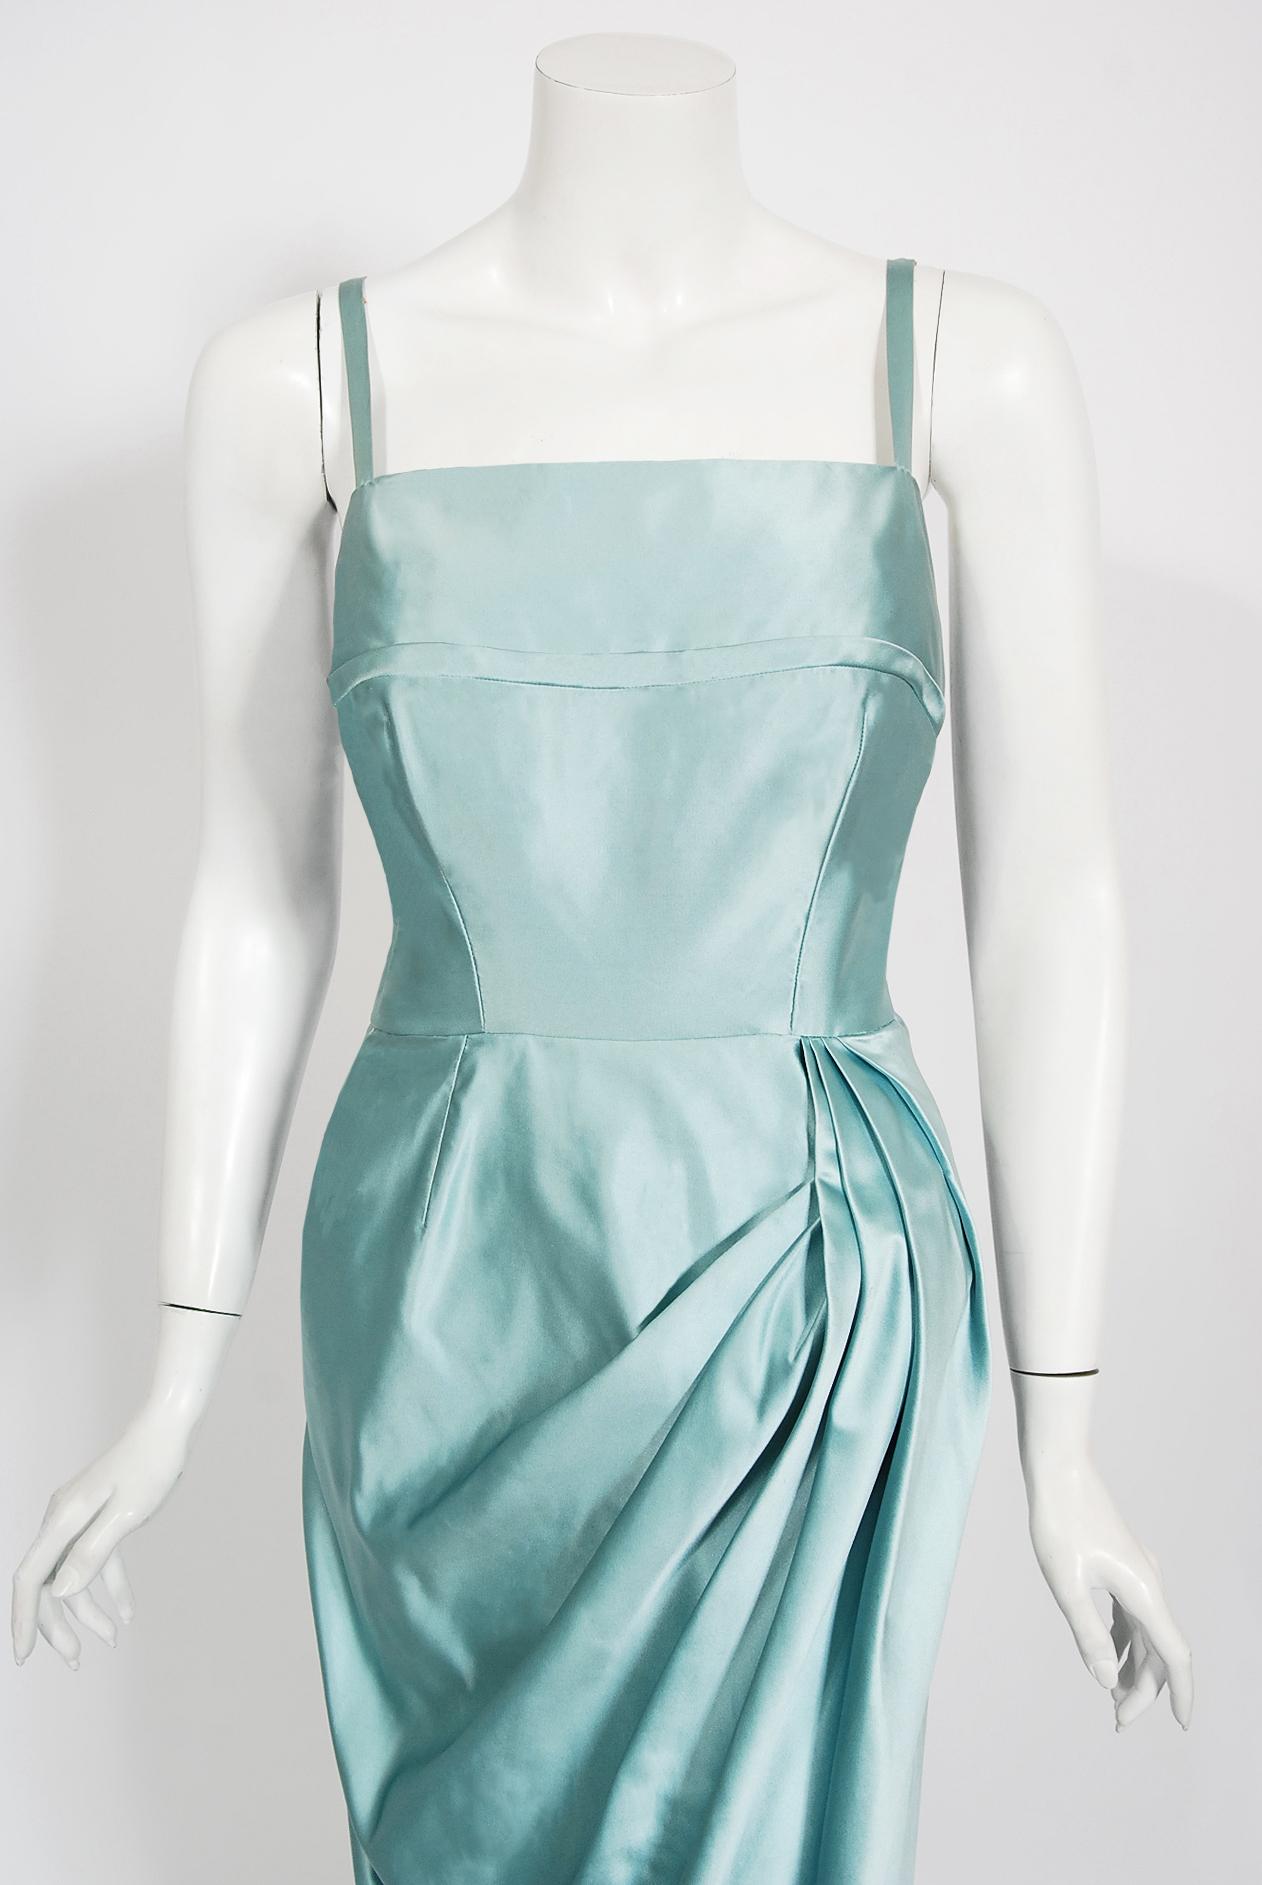 Absolutely gorgeous 1950's ice-blue gown by the highly adored 